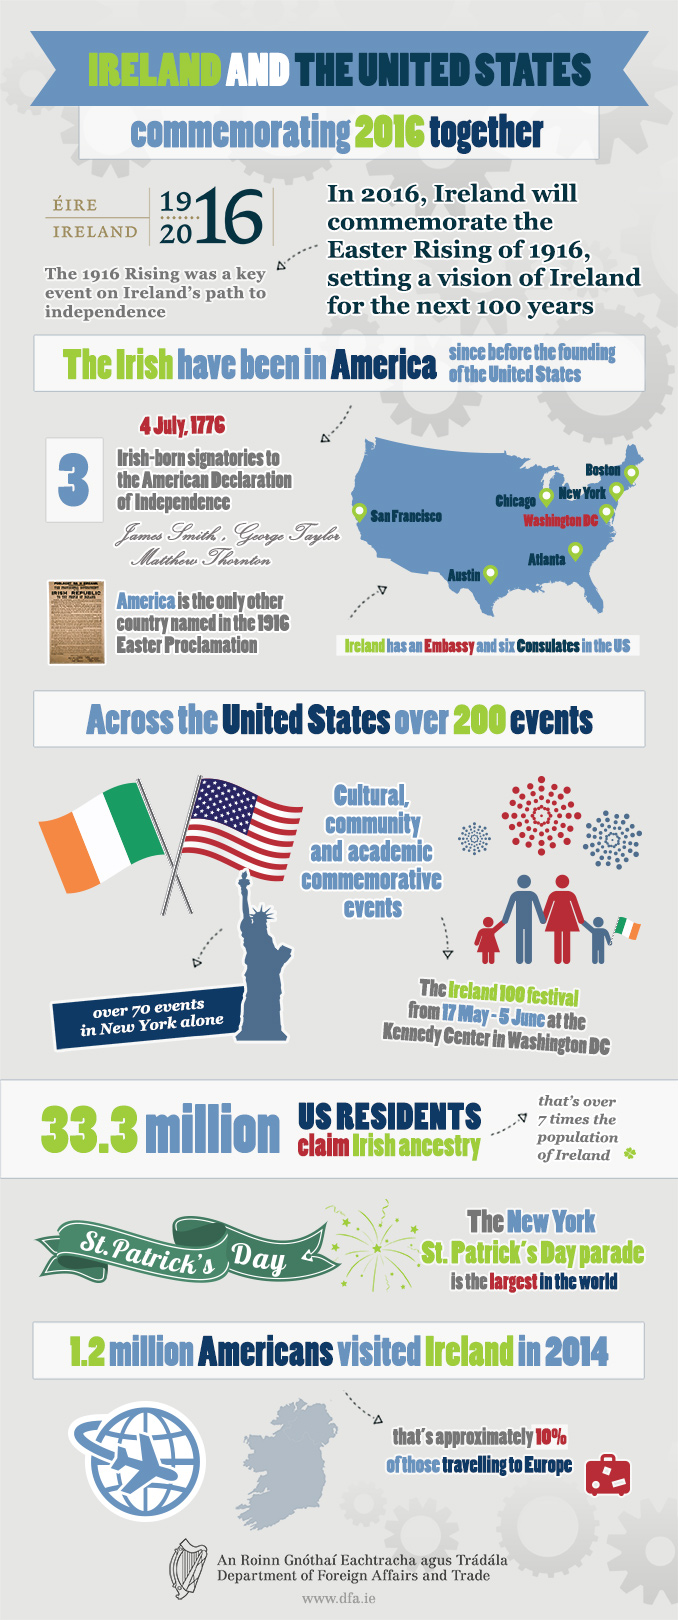 Minister Flanagan visits New York to launch USA Ireland 2016 Programme